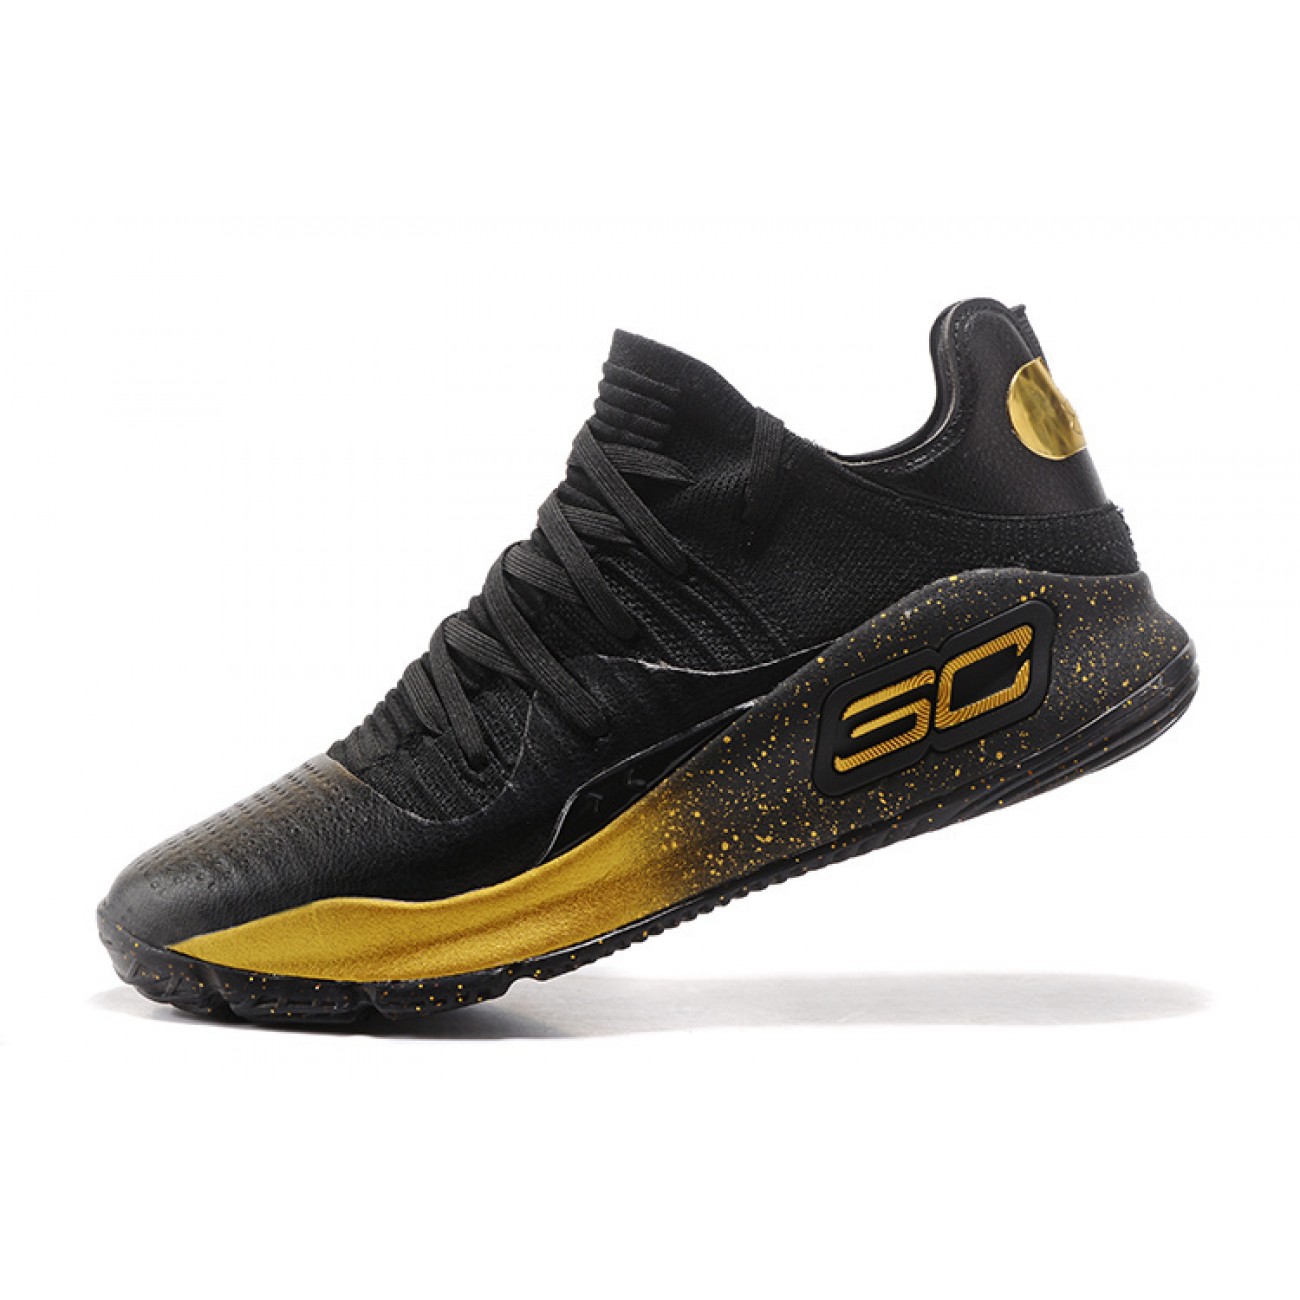 Under Armour UA Curry 4 WMN Low Black/Gold